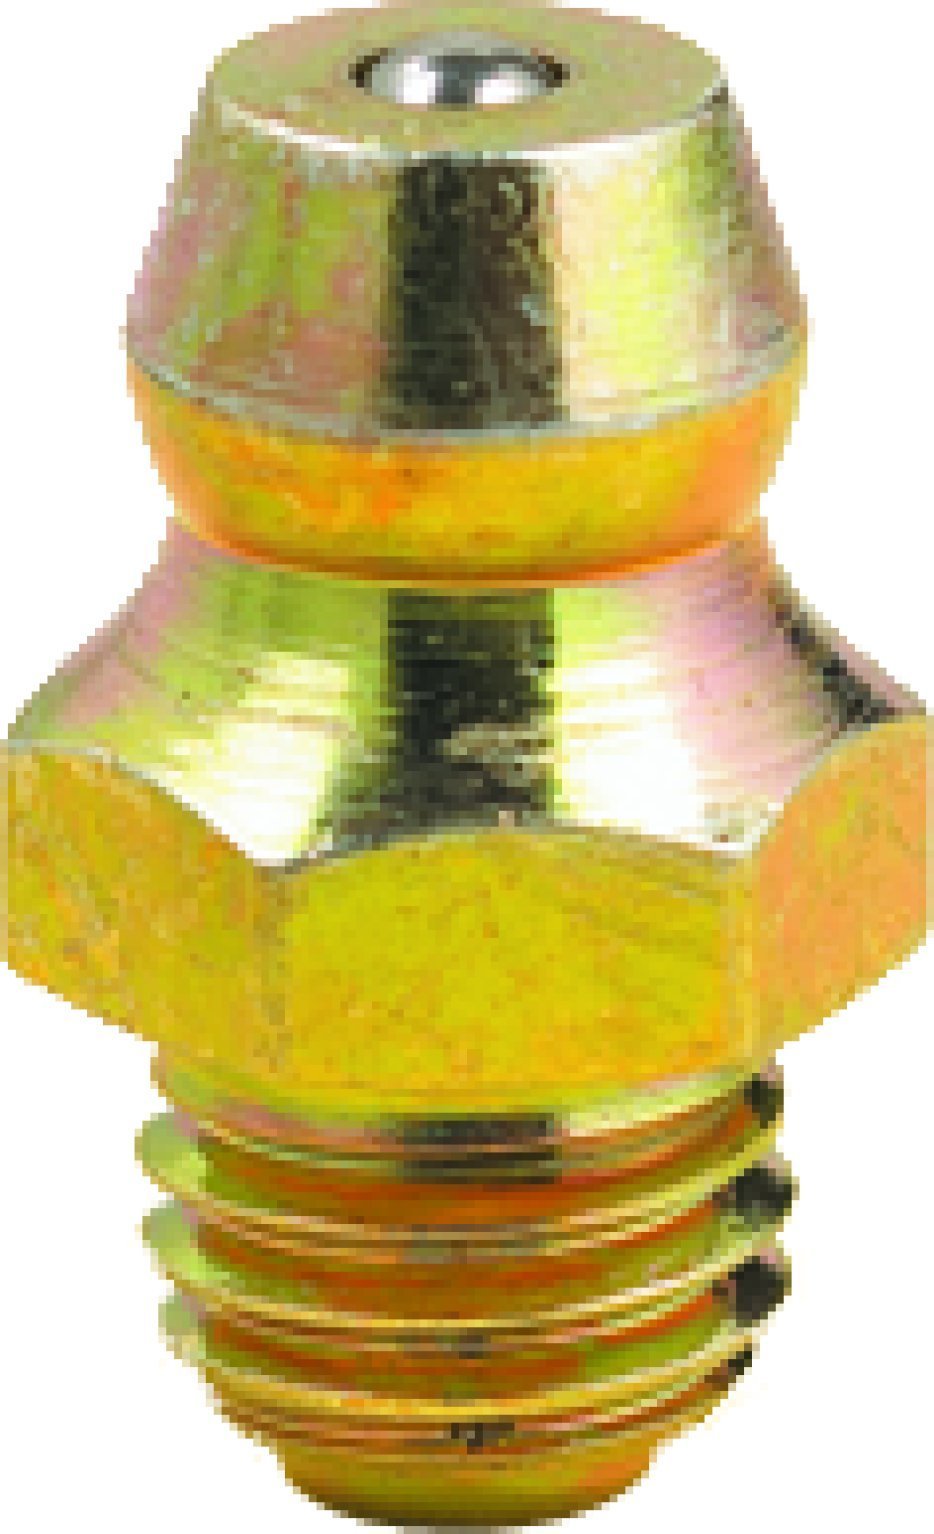 Lumax Gold/Silver LX-3007-5 1/4"-28 Taper Thread (SAE-LT) Straight 0.54" Long Grease Fitting, (Pack of 5). Used on Most auto Vehicles and Industrial Equipment, 5 Pack - LeoForward Australia